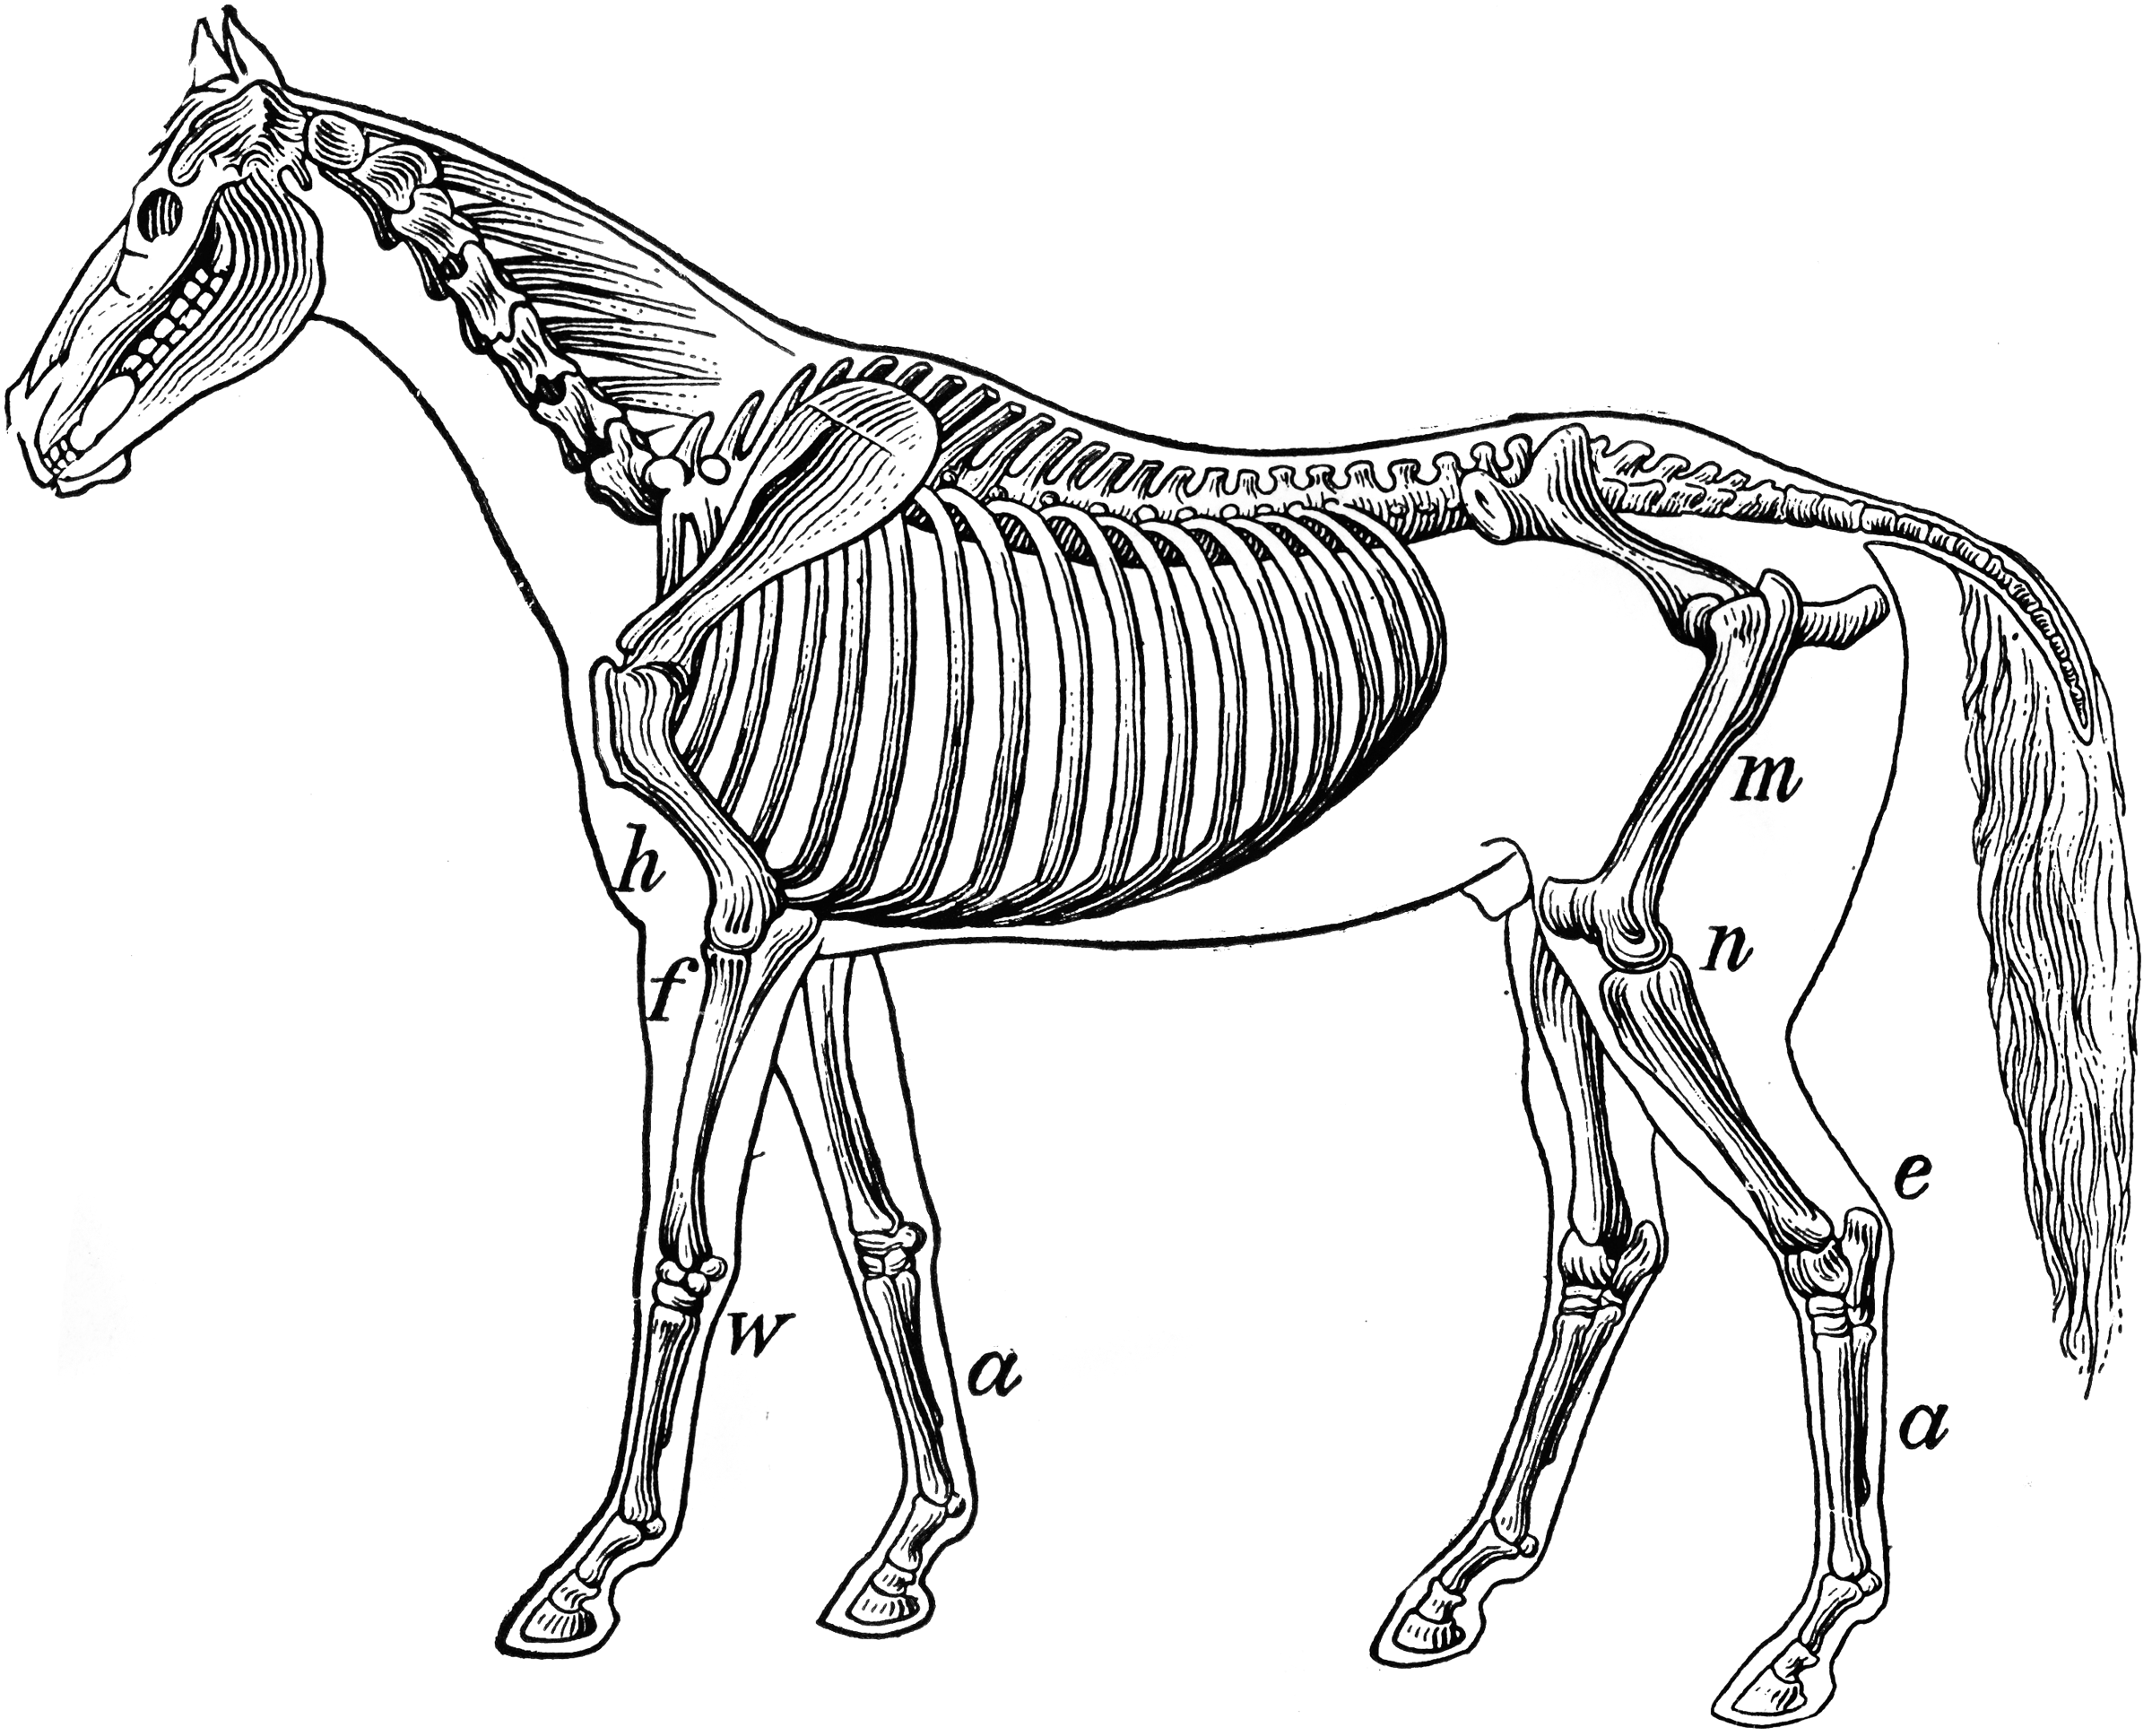 Skeleton of a Horse | ClipArt ETC